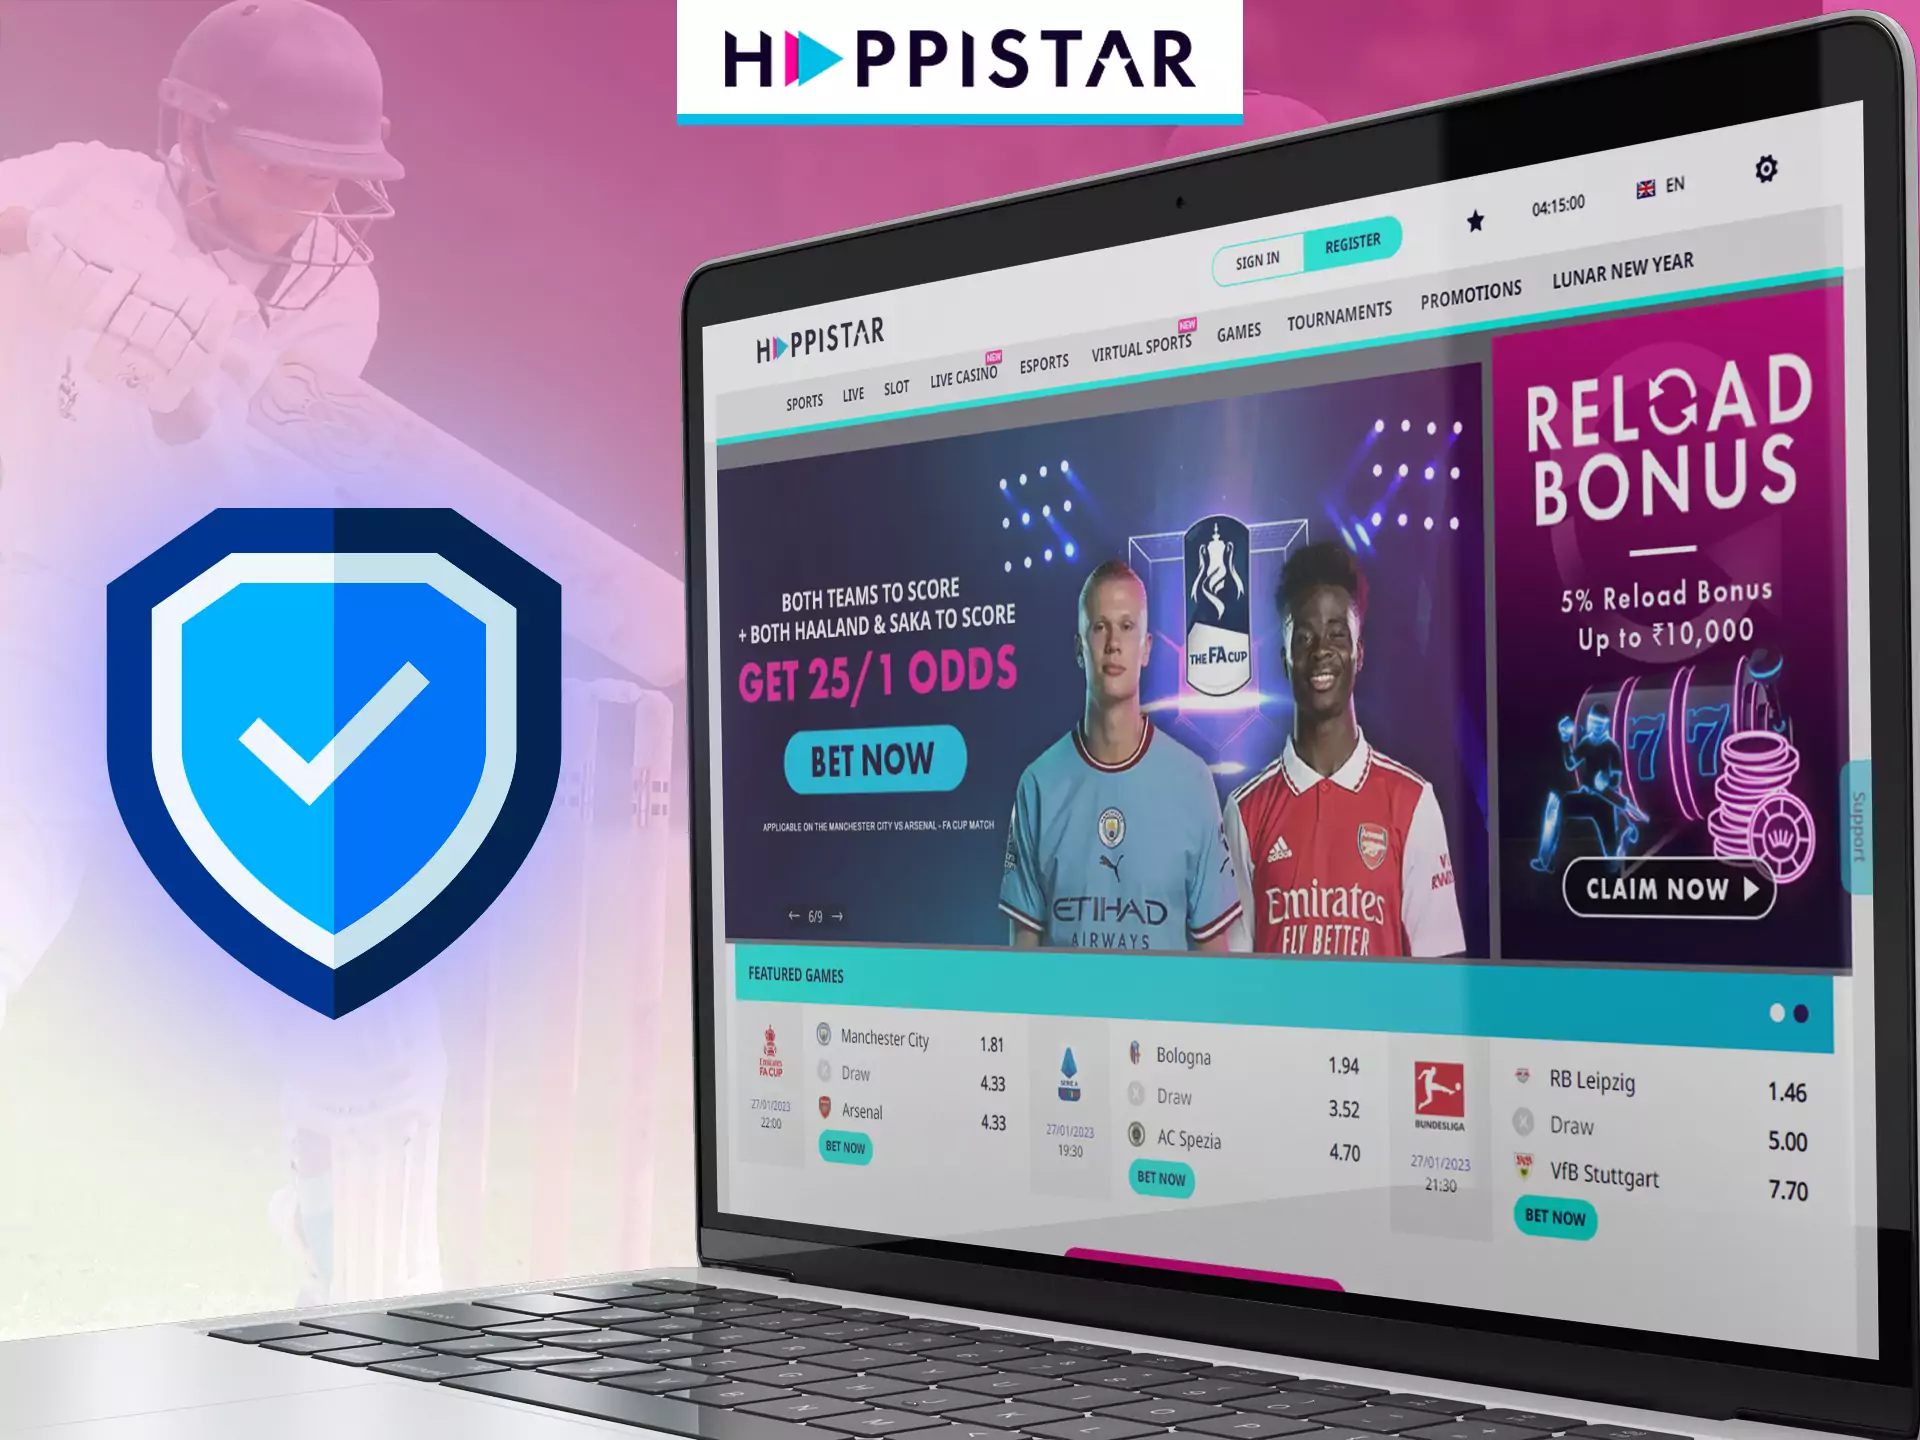 Happistar provides secure and safe betting and casino services.